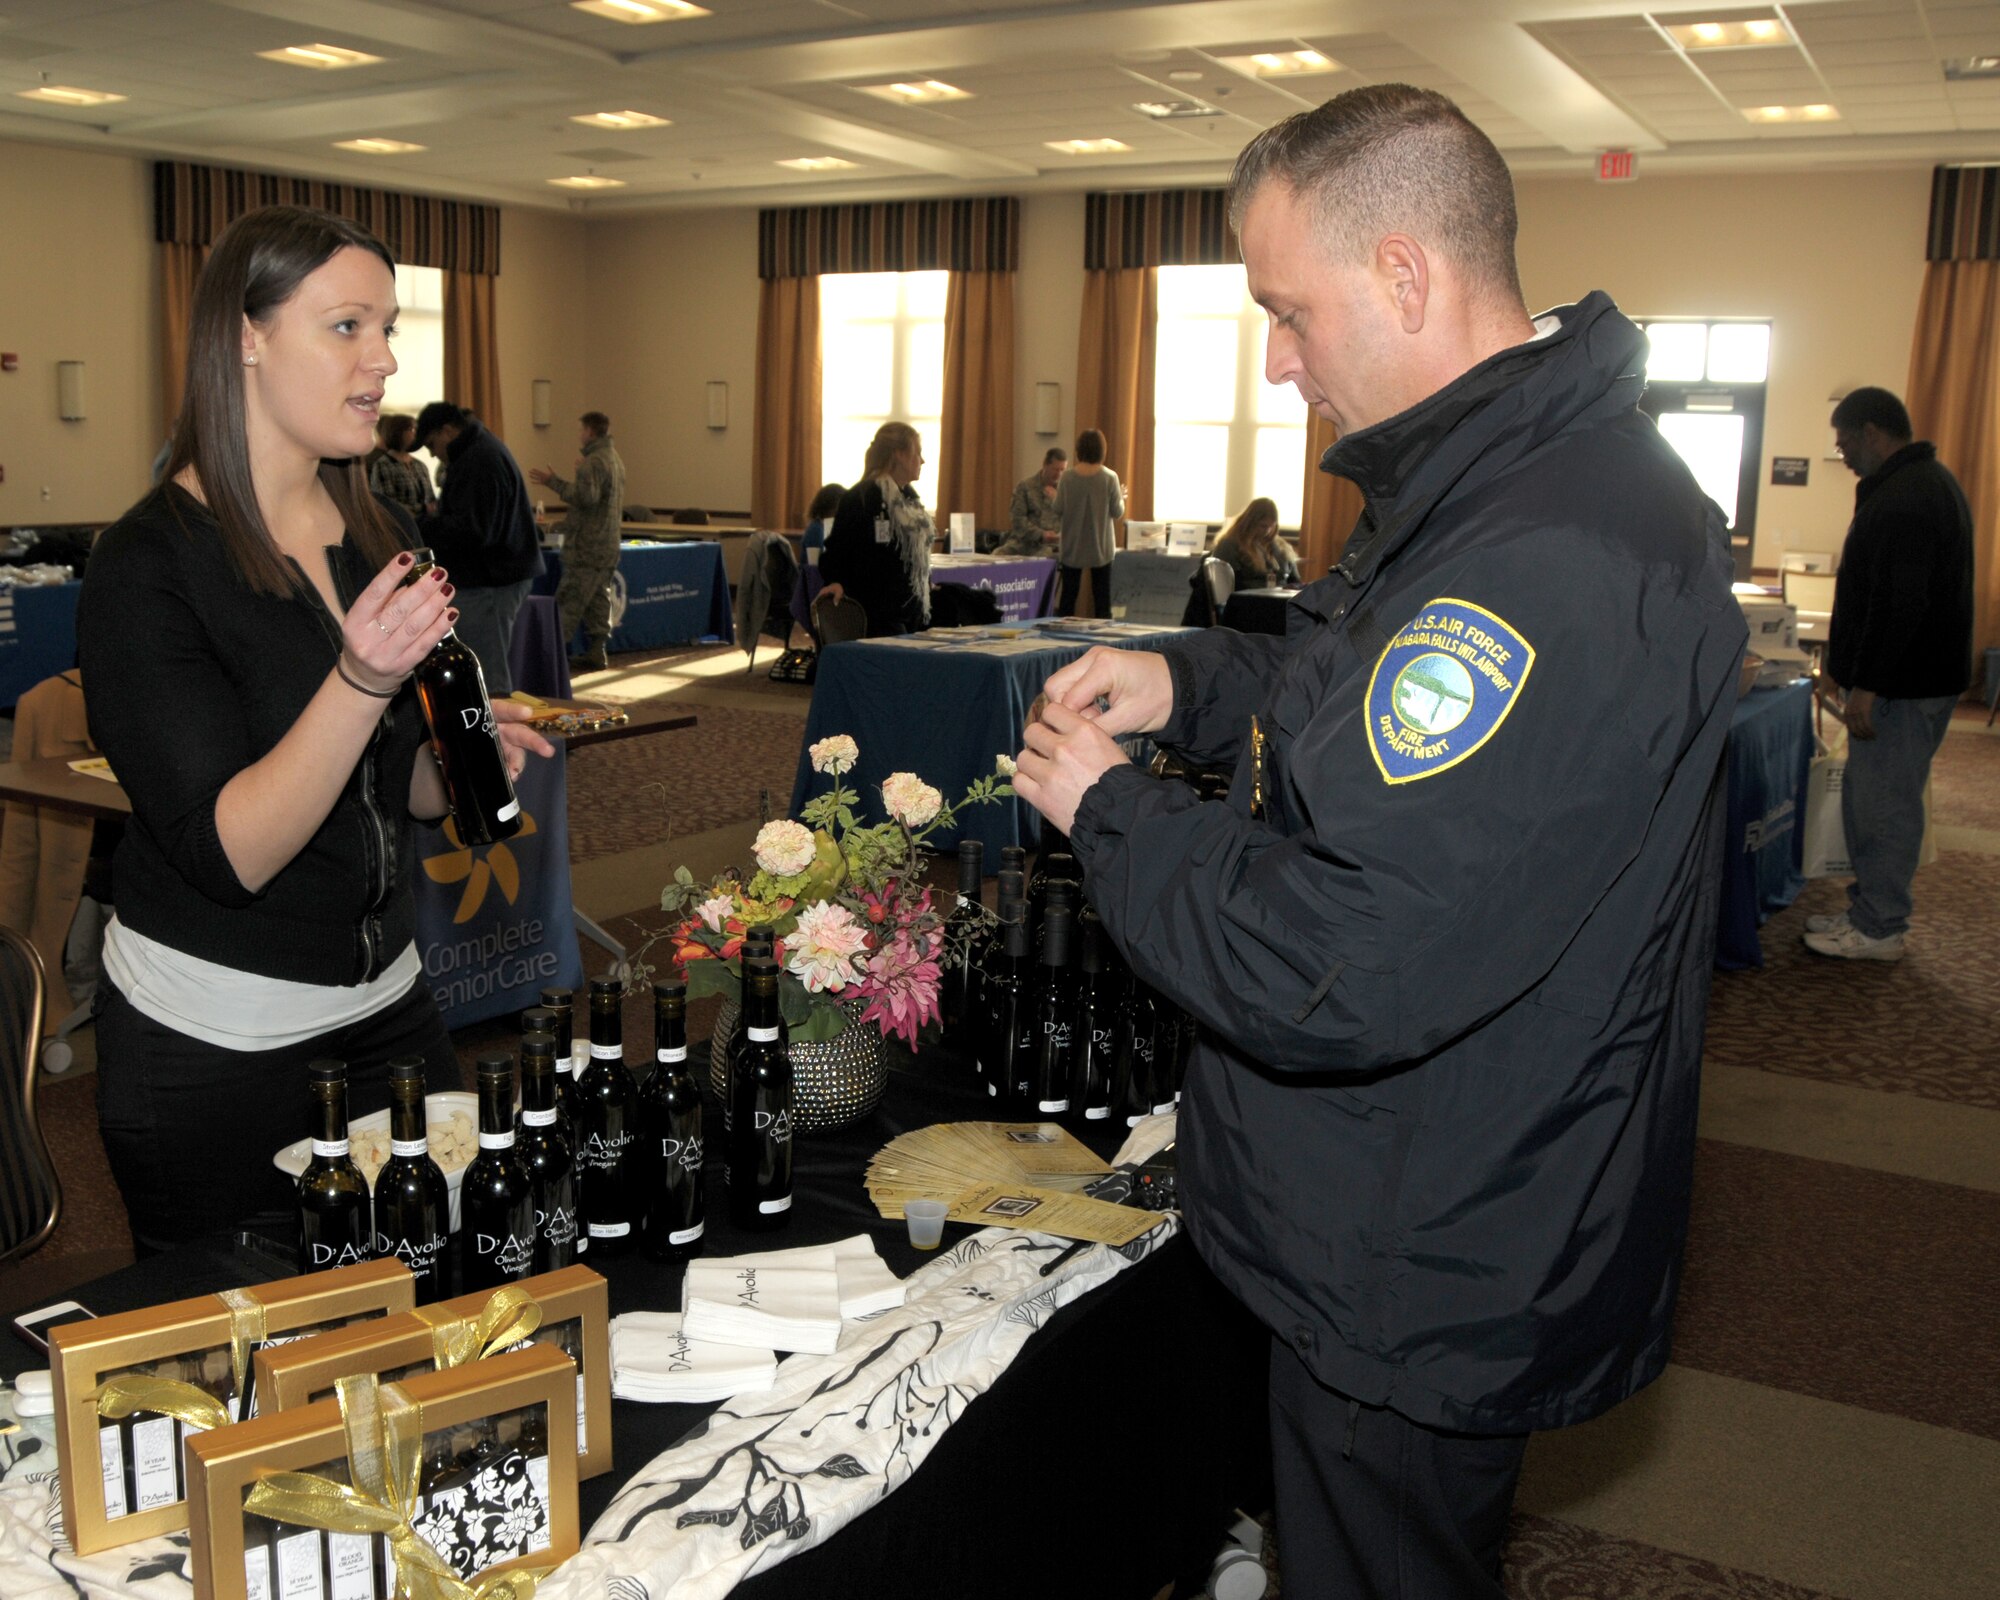 Karen Lombardi (left), a demonstrator with D'Avolio chats with Assistant Fire Chief Joe Foucha, Niagara Falls Air Reserve Station Fire Department about the different olive oils and vinegars and the health benefits it provides on January 15, 2013 at the Niagara Falls Air Reserve Station, NY. Approximately 30 vendors were on hand at the Get Fit Wellness Seminar which was held at the Niagara Heritage Center. Some of the vendors offered information on bone density screening, smoking cessation, glucose/BMI screening, animal therapy and more. (U.S. Air Force photo by Peter Borys)